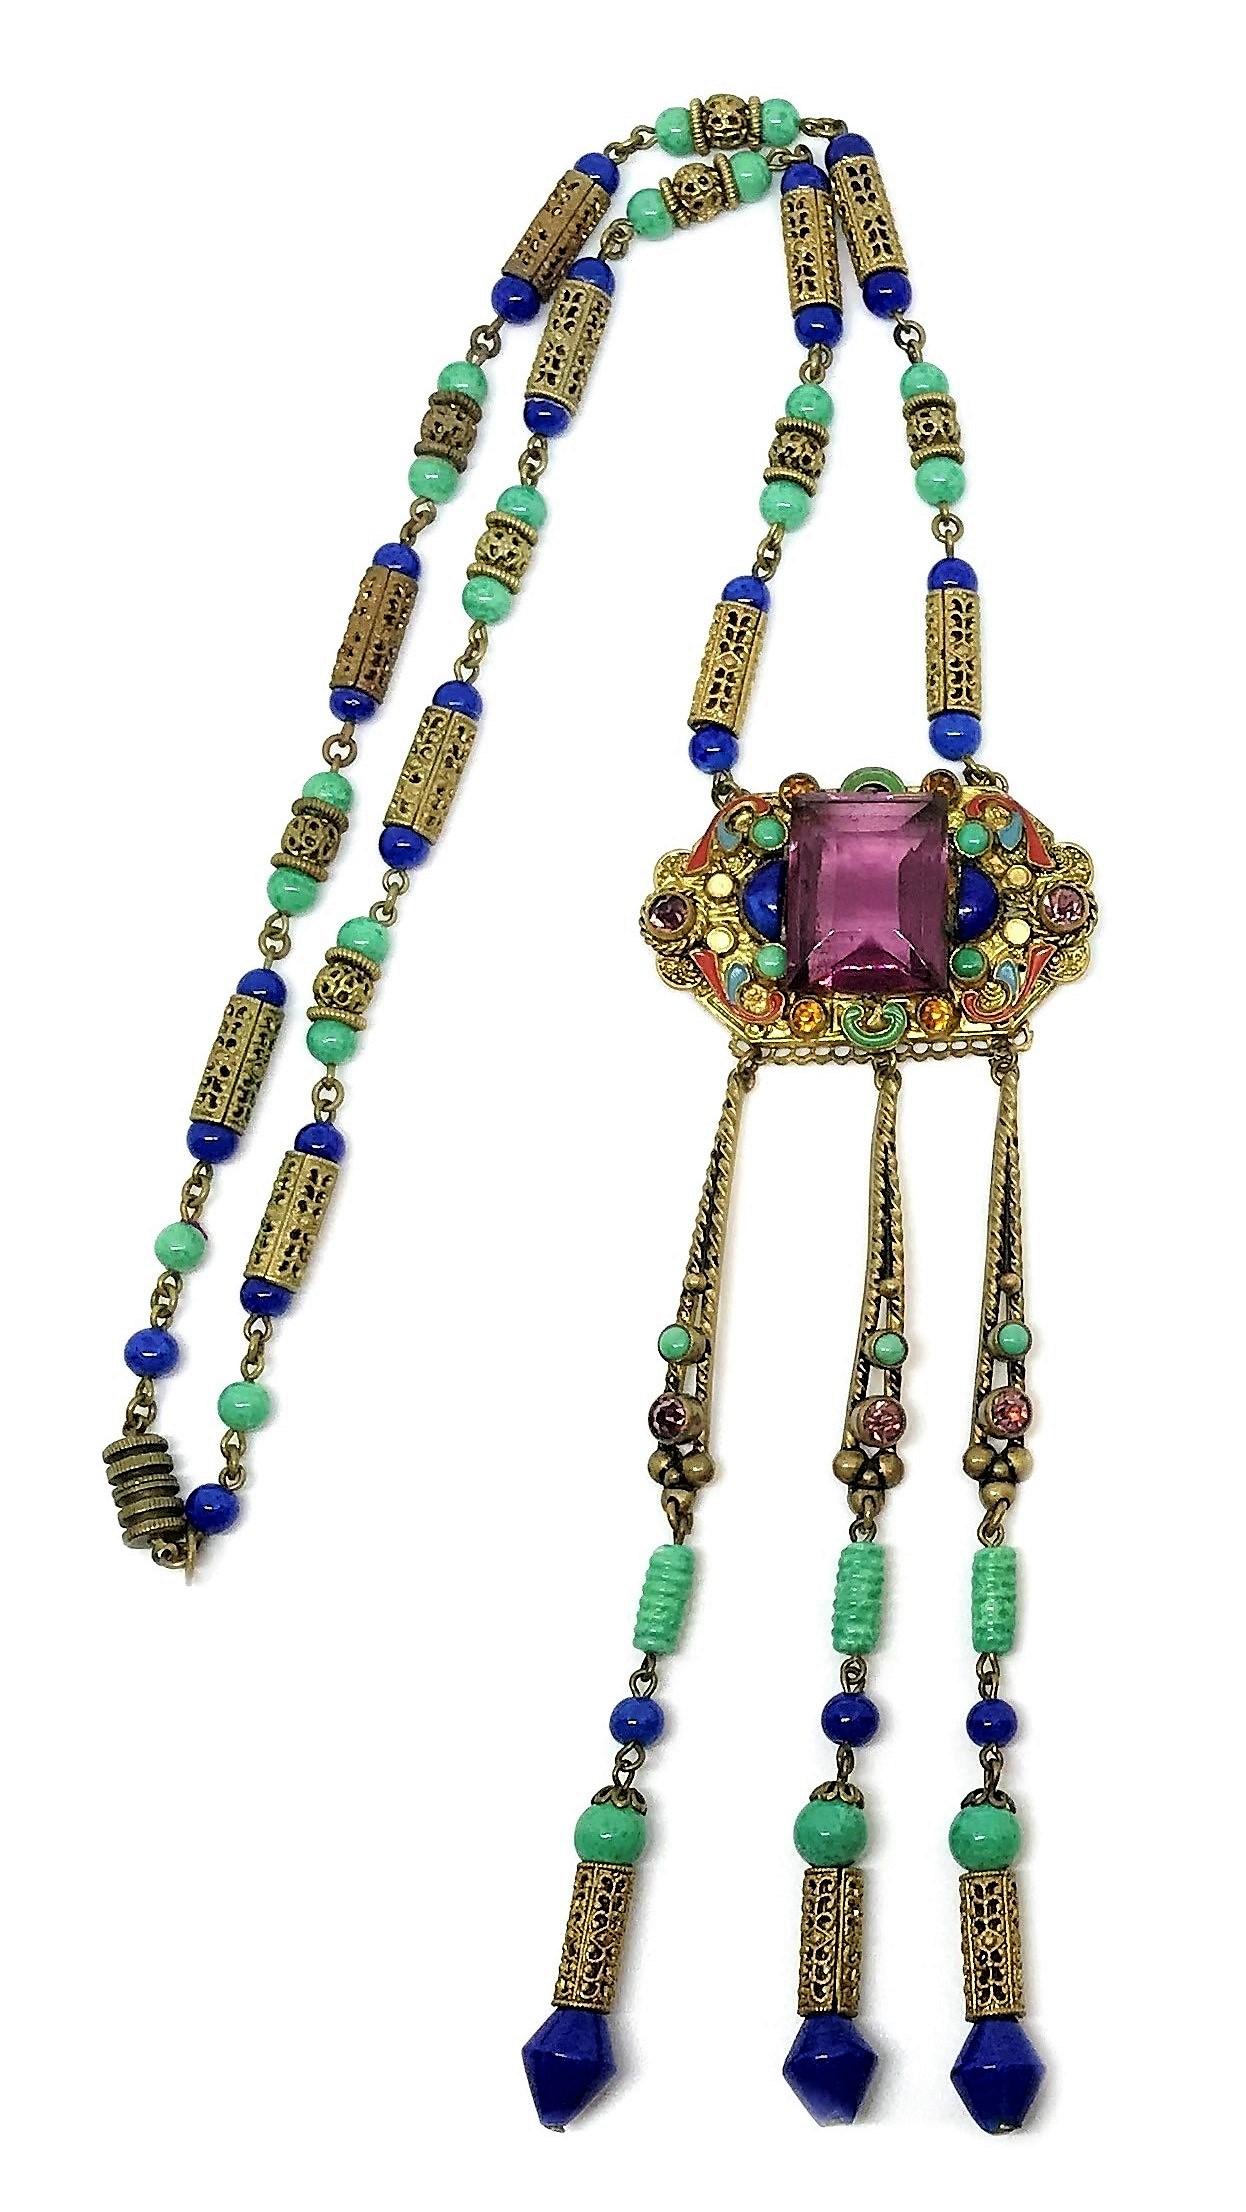 Circa 1920s to 1930s Czechoslovakian Egyptian Revival necklace with a brass pendant set with a large emerald cut, purple faceted glass stone. The pendent is embellished with multiple shape and color glass cabochons, red enameling and long jeweled